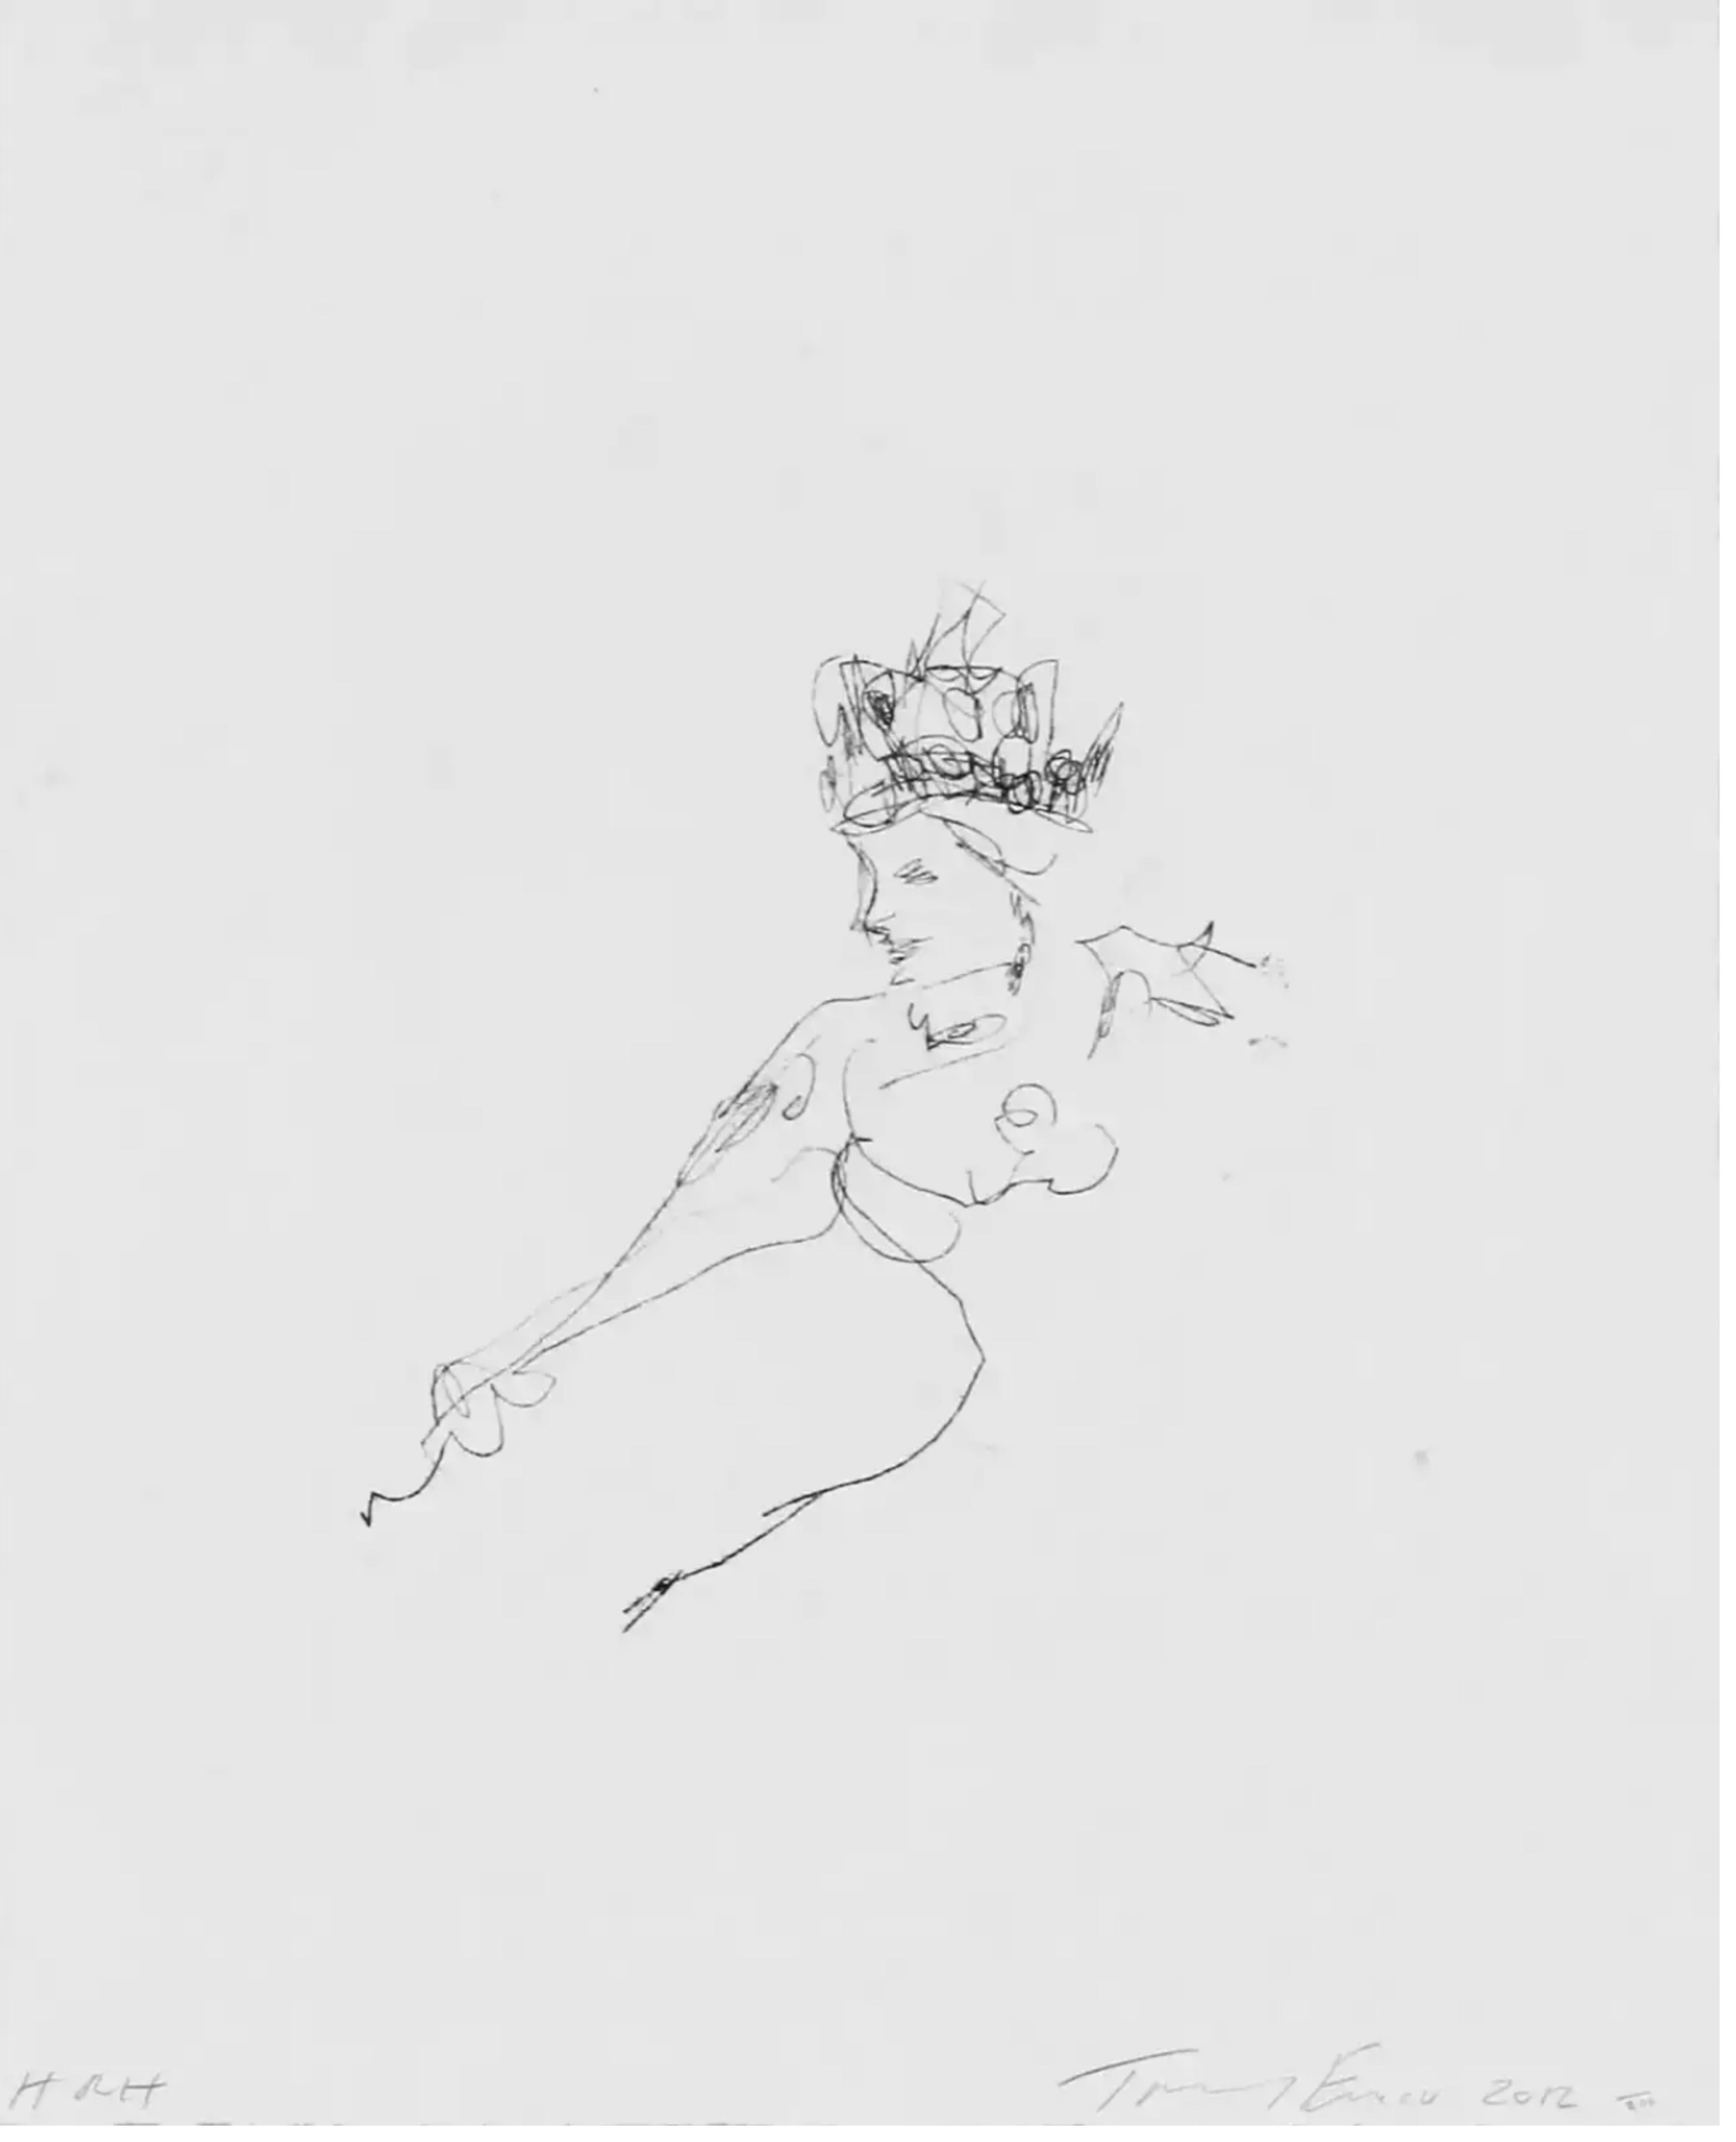 Tracey Emin Abstract Print - HRH (Homage to Her Royal Highness - H.R.H. ) Portrait of Queen Elizabeth II